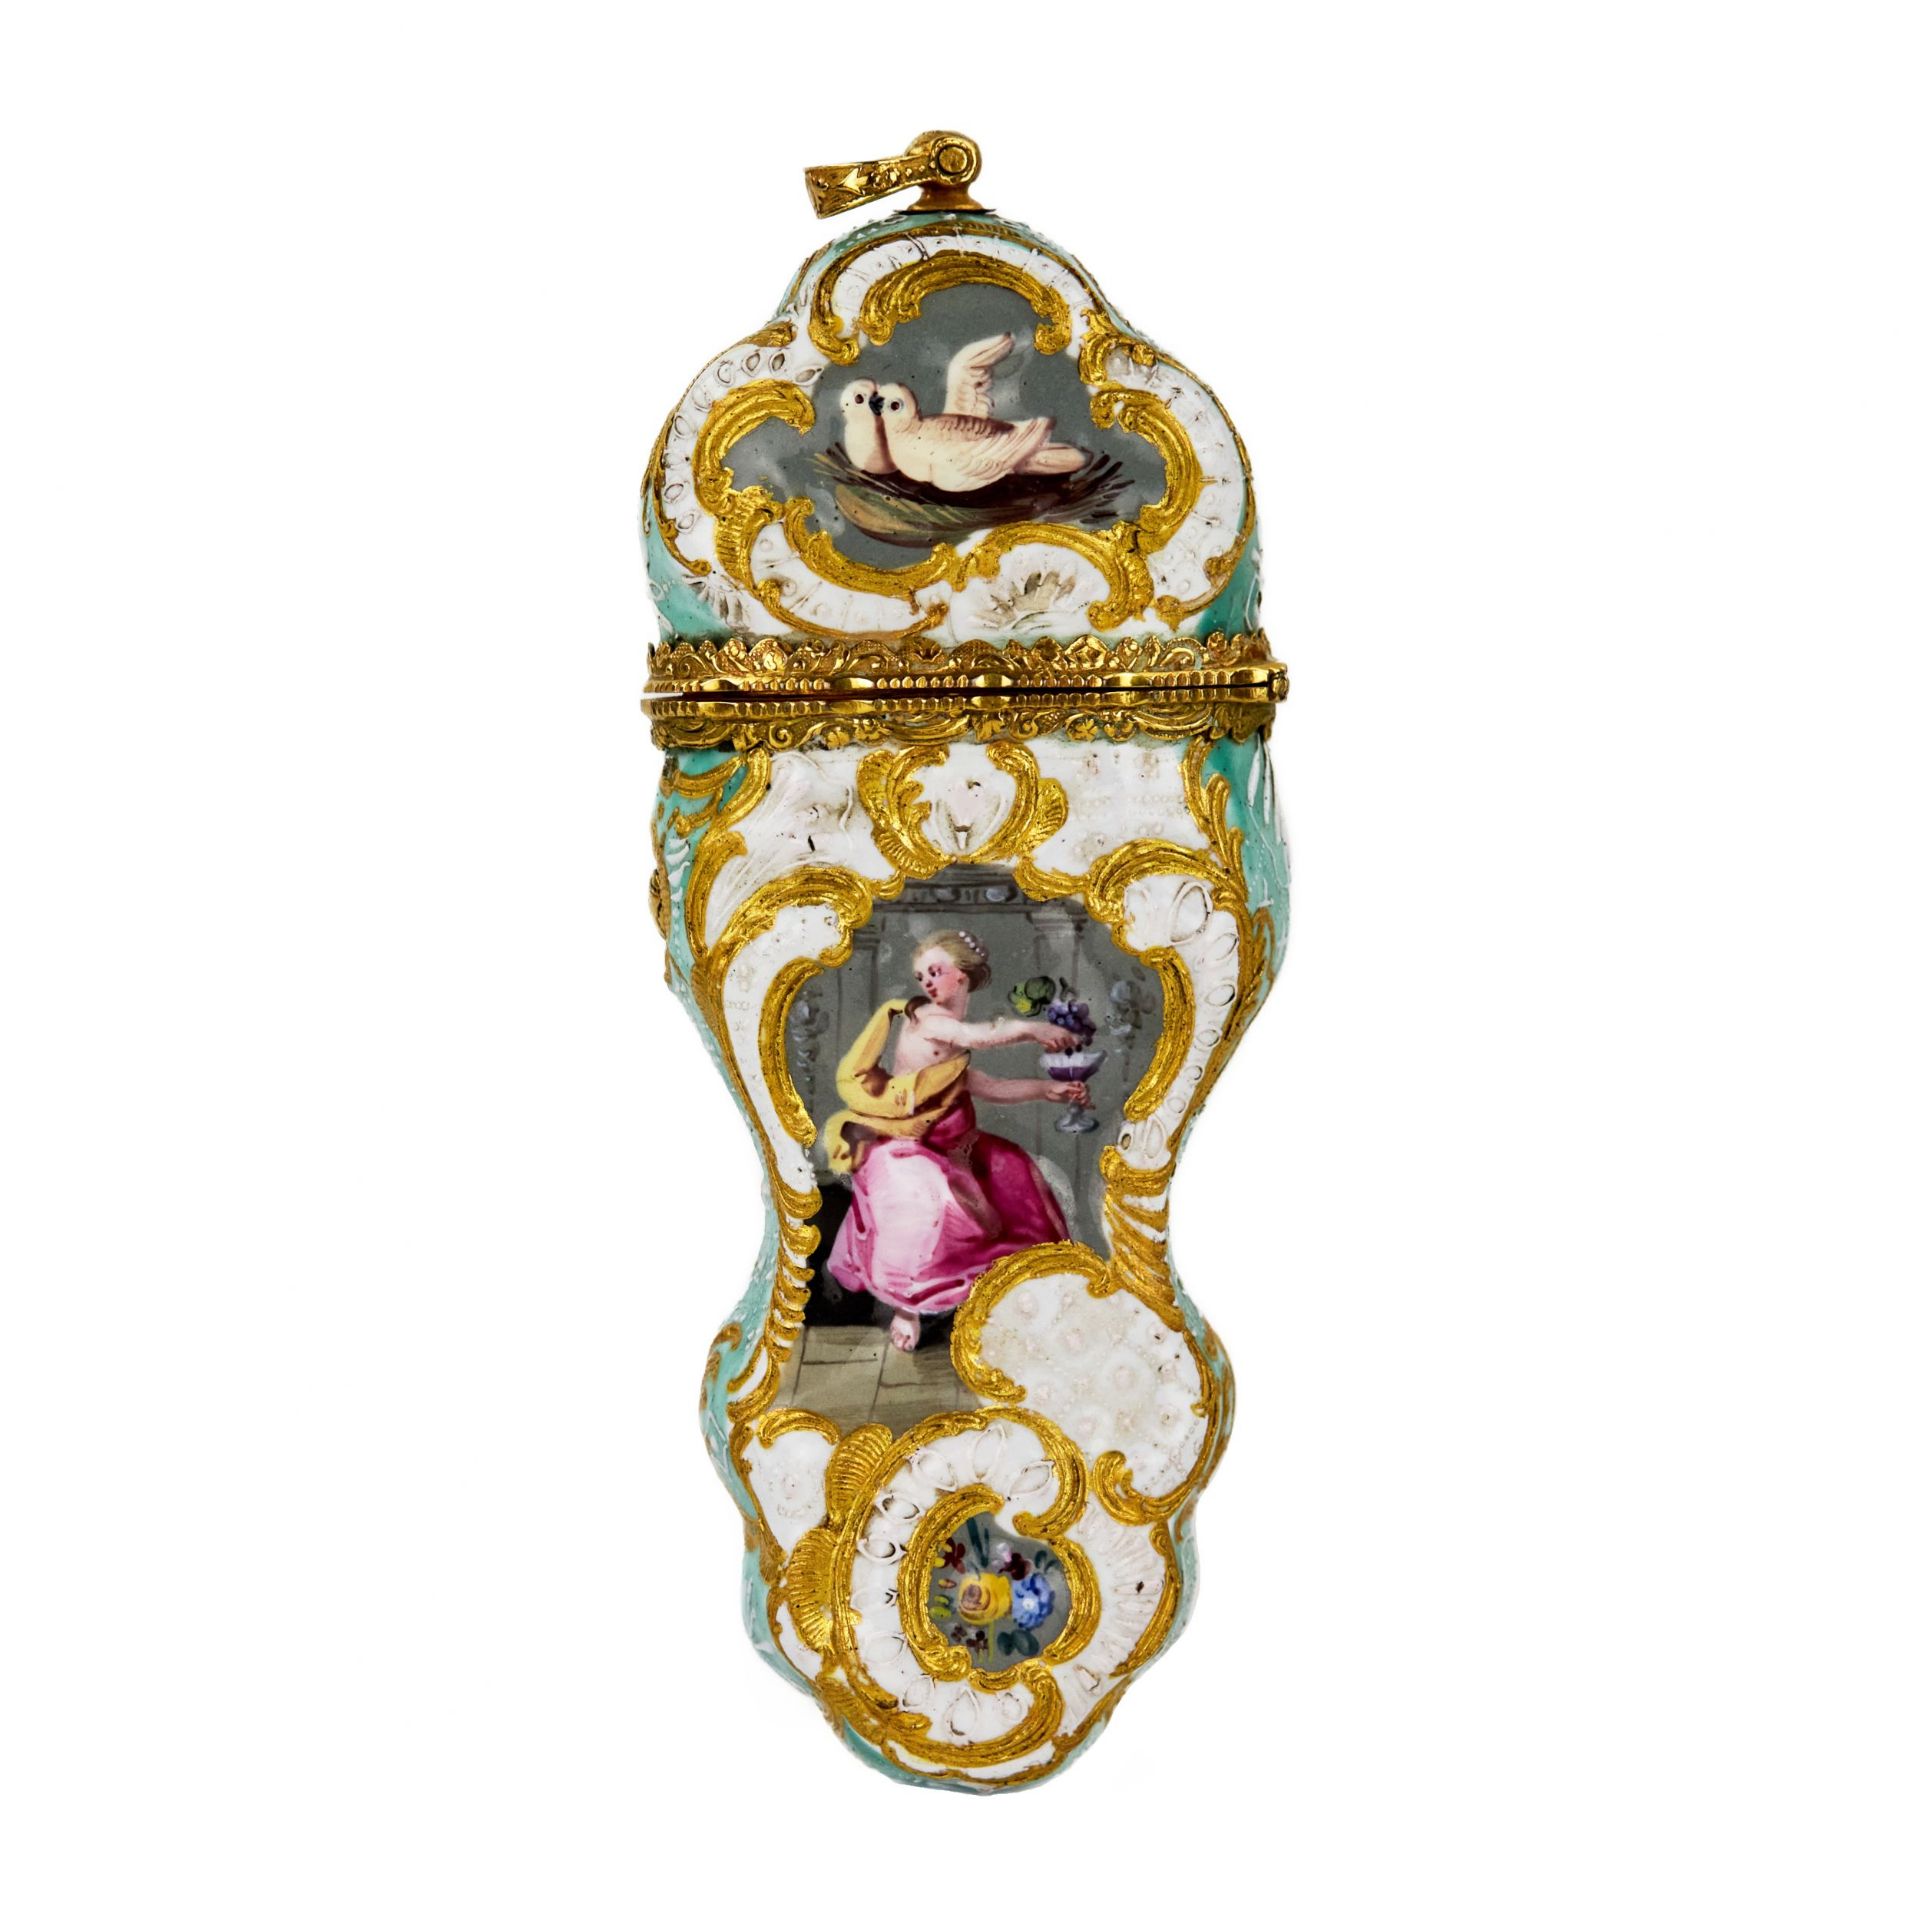 English painted porcelain necessaire with gold. 18 century. - Image 6 of 10